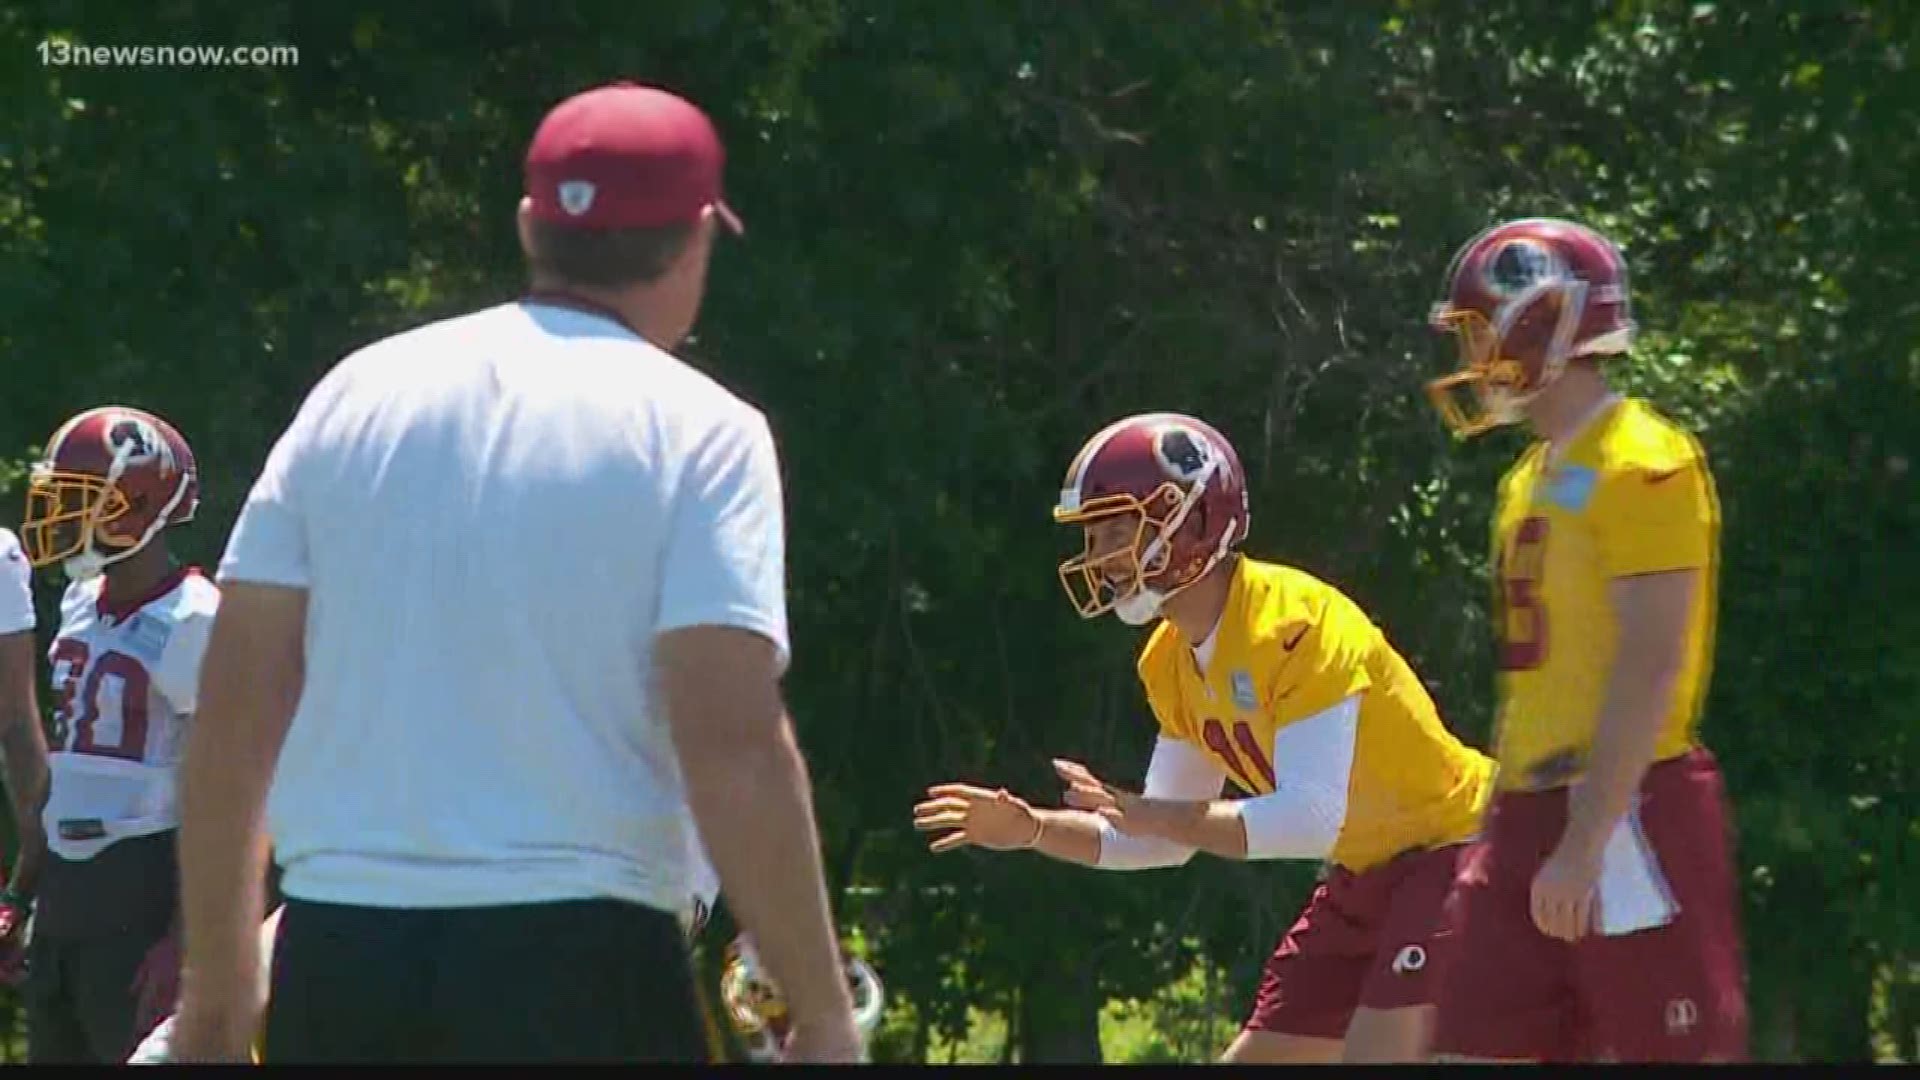 The Redskins new quarterback is a fast learner and as Jay Gruden says, "He's the smartest guy I've ever been around."